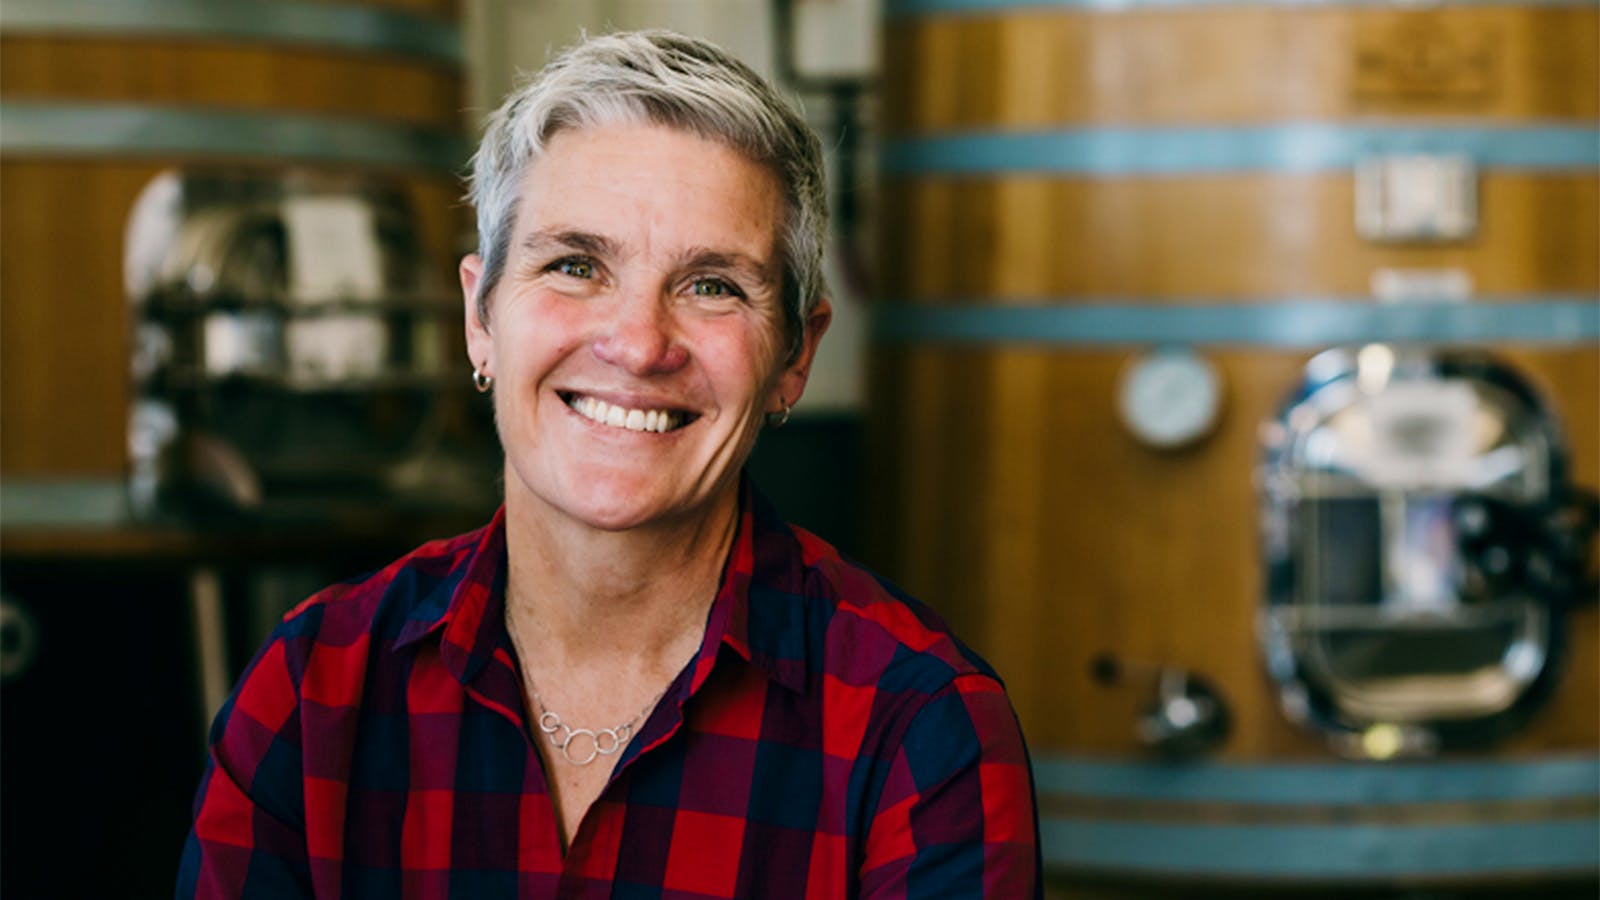 Trinchero's New Director of Winemaking Says Wine Is All About Teamwork